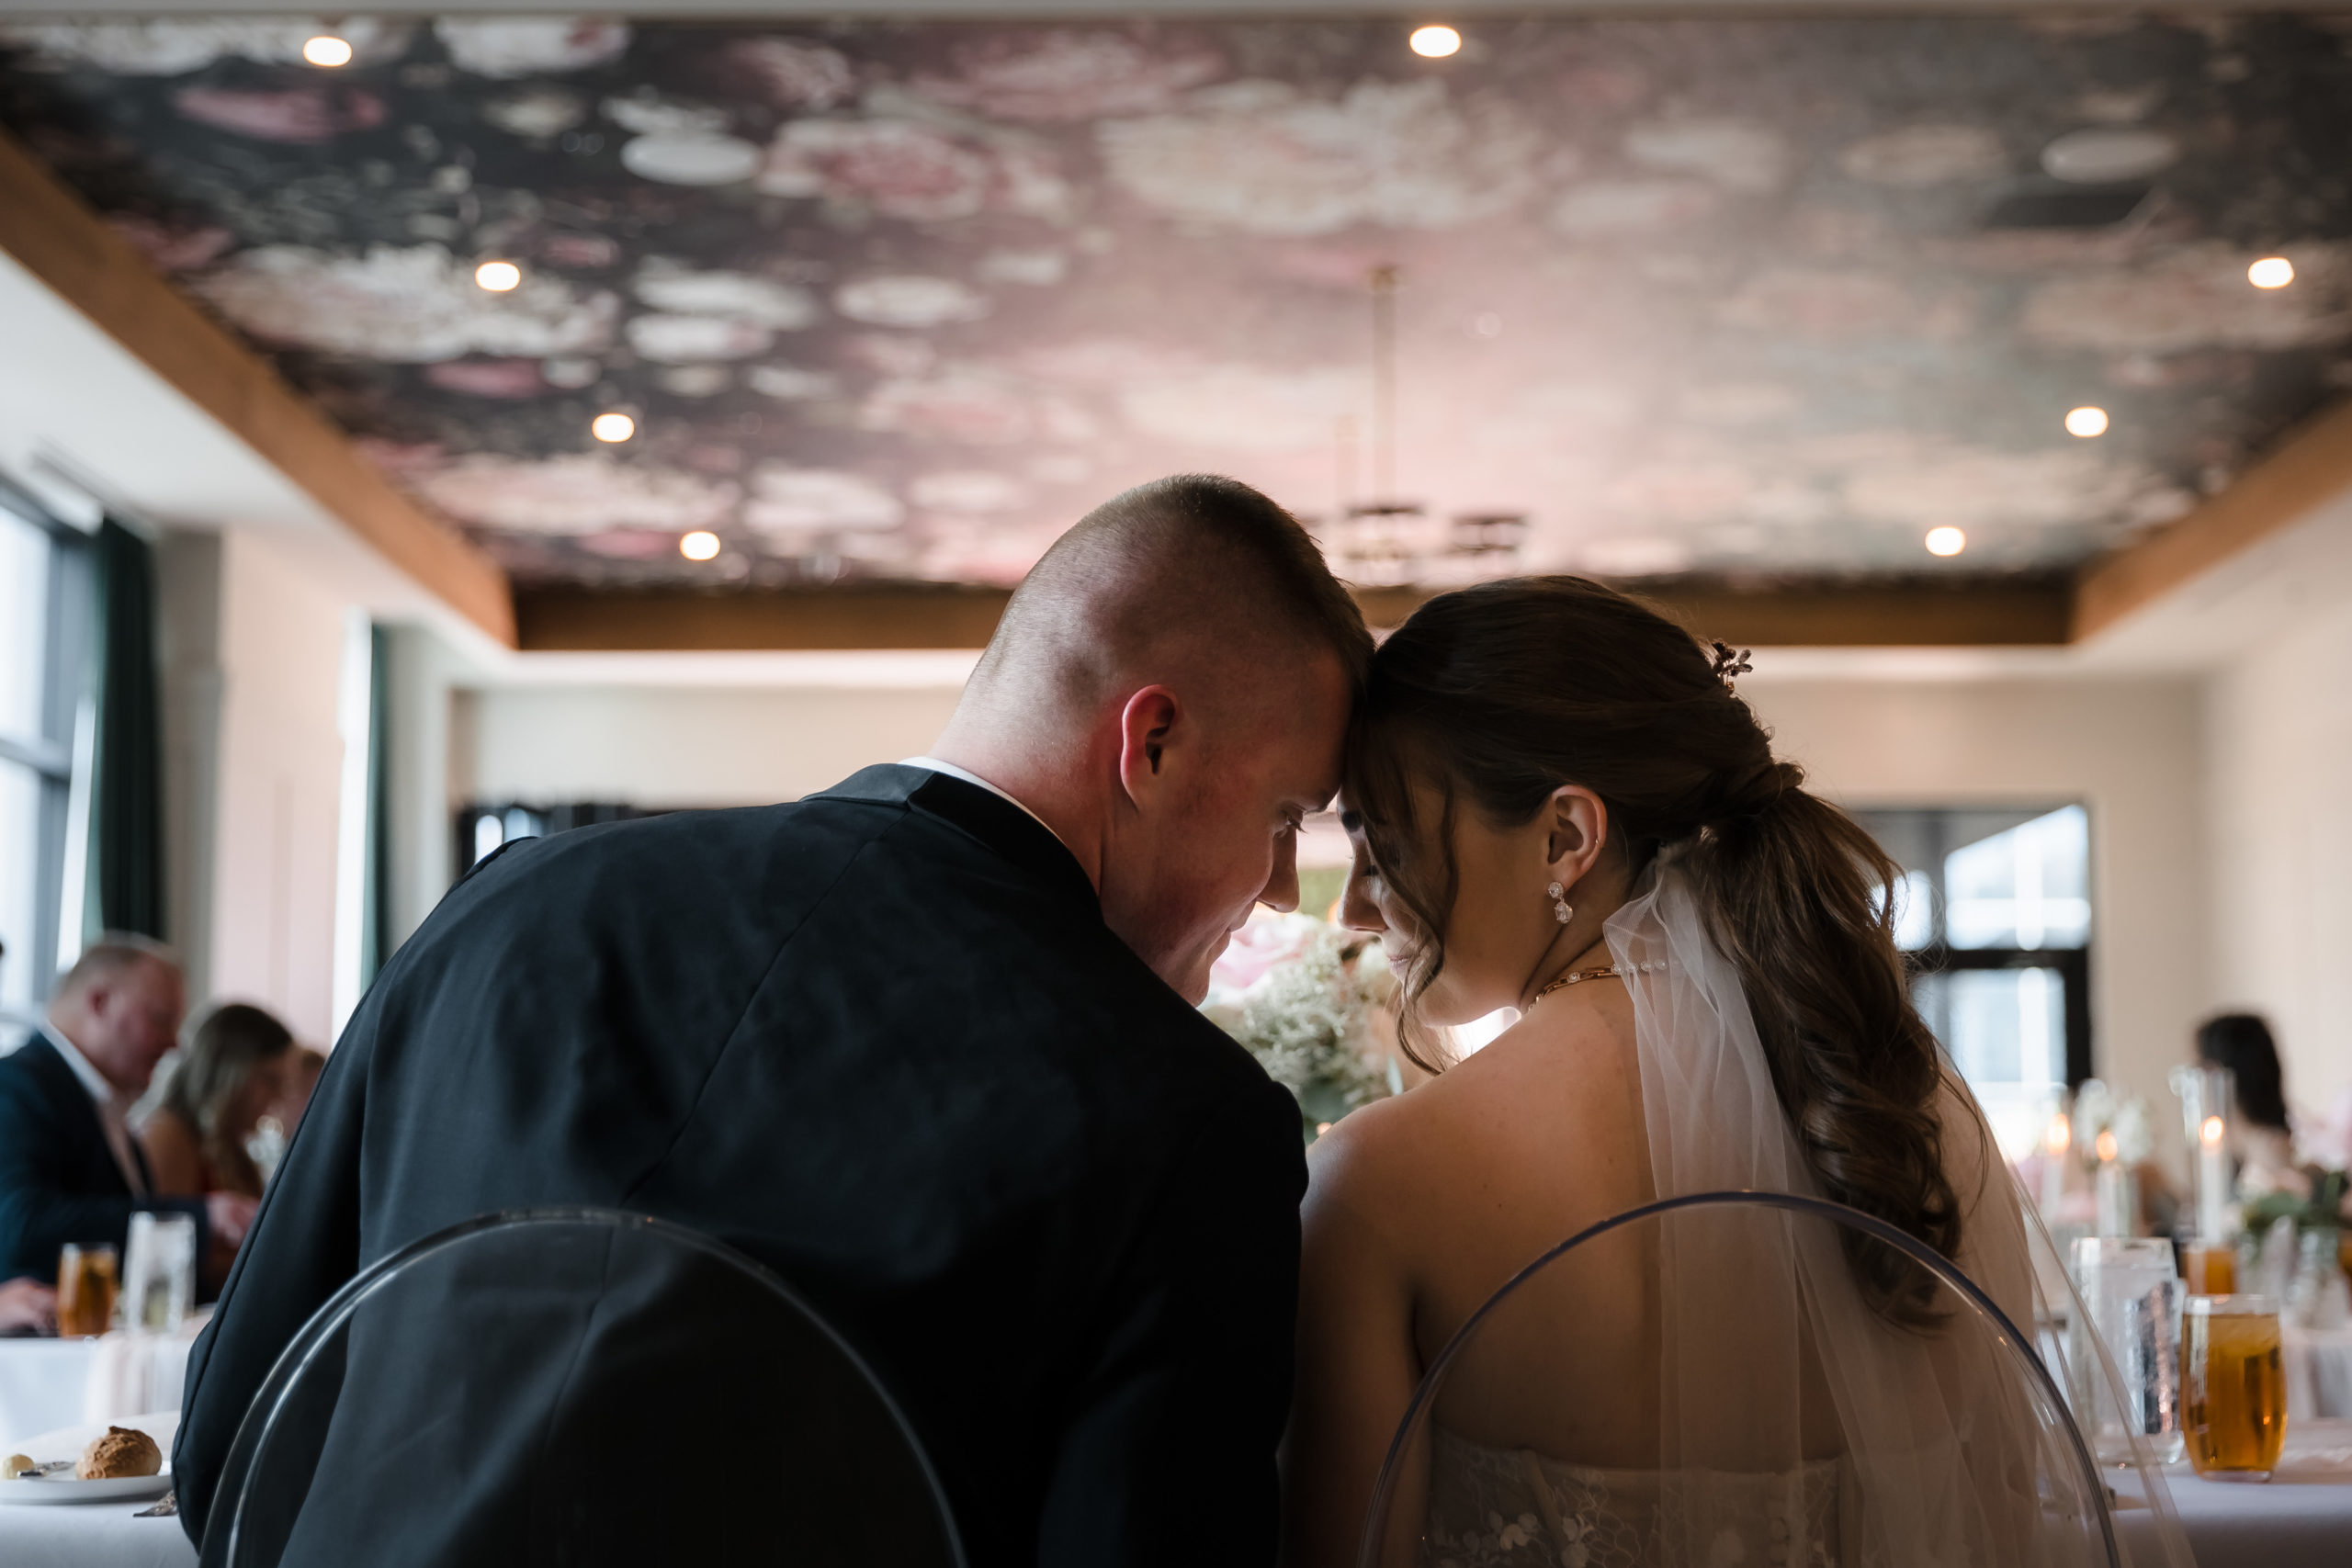 A bride and groom touch their foreheads together while prying for their first meal as husband and wife with a background of a floral mural painted on the ceiling.